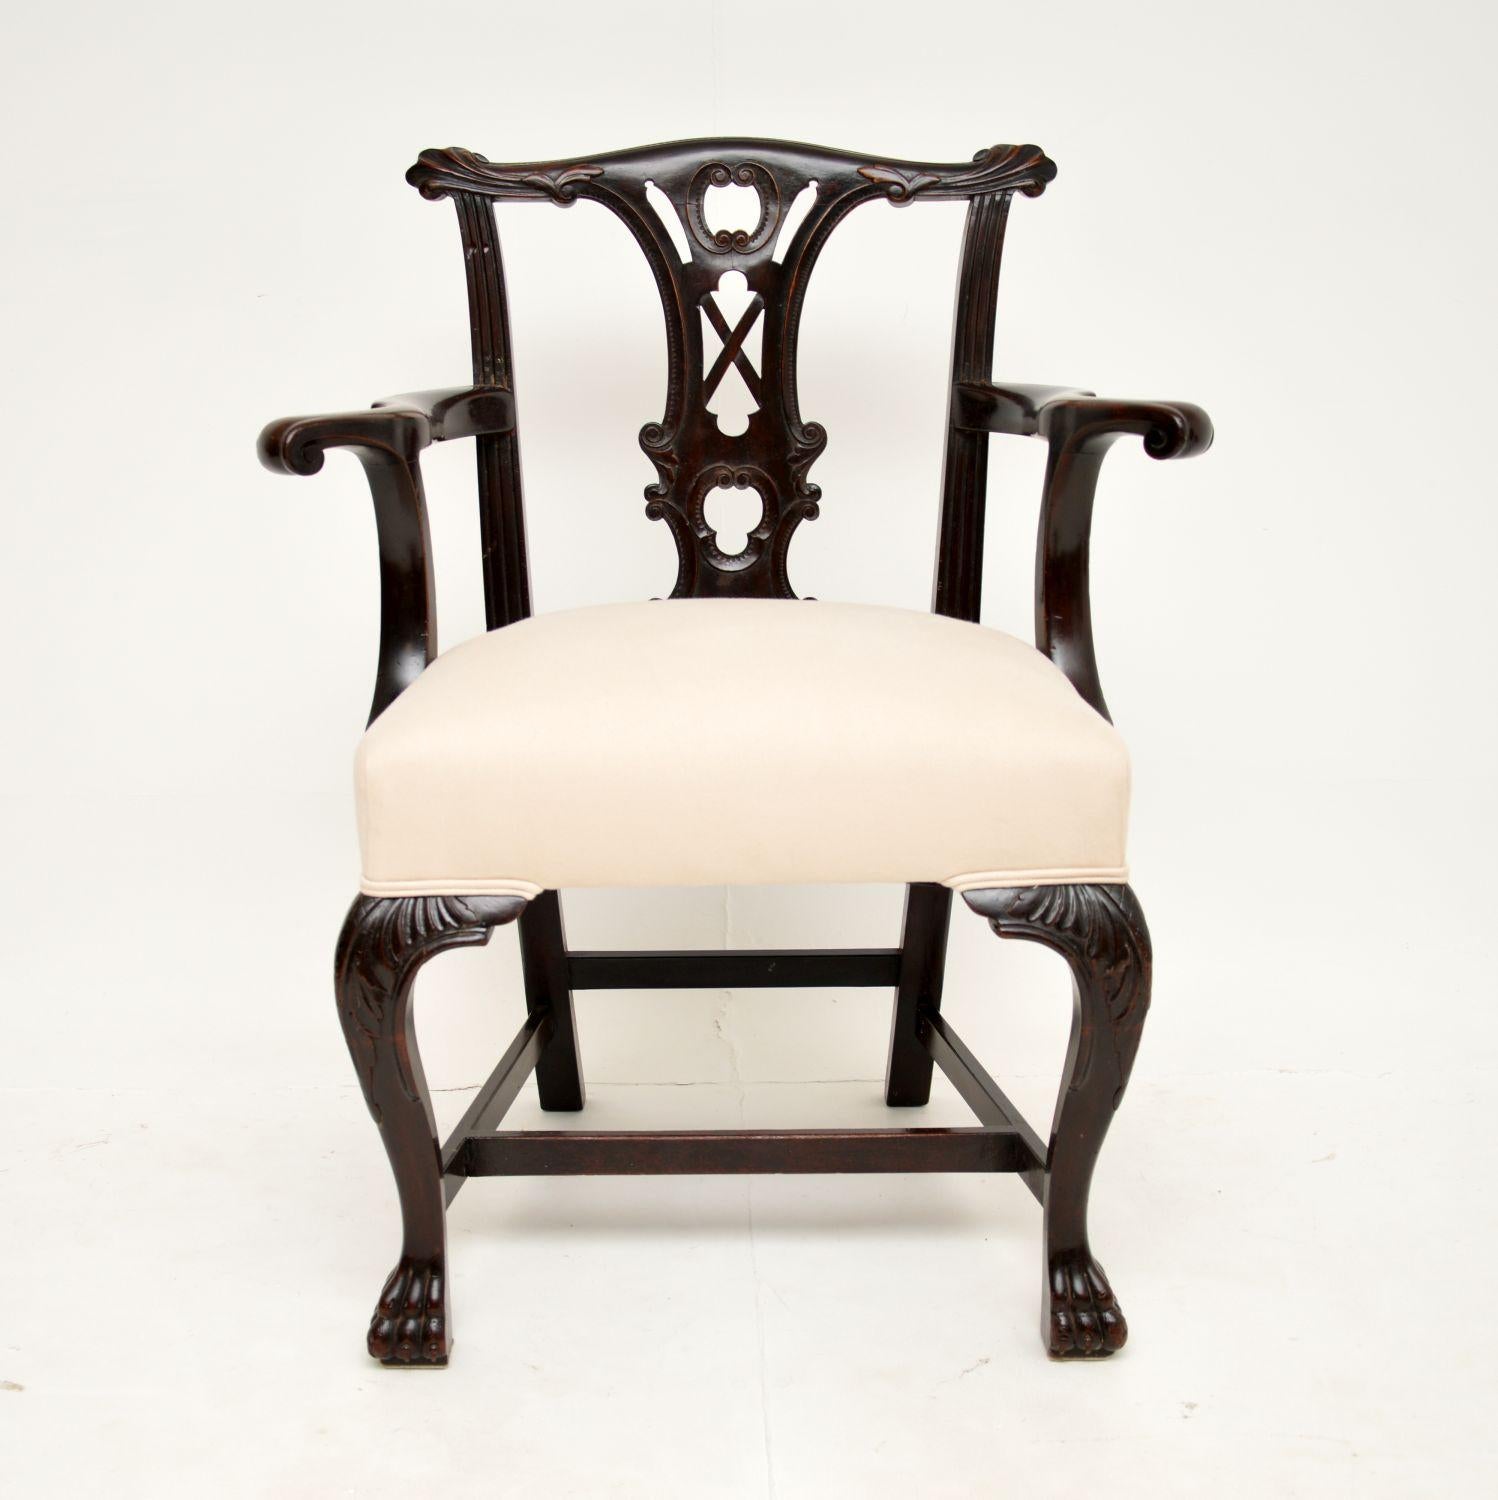 An excellent Georgian period armchair in the Chippendale style. This very fine example was made in England, it dates from around 1760-80’s period.

It is of absolutely fabulous quality, with a very bold and beautifully carved frame. It has a wide